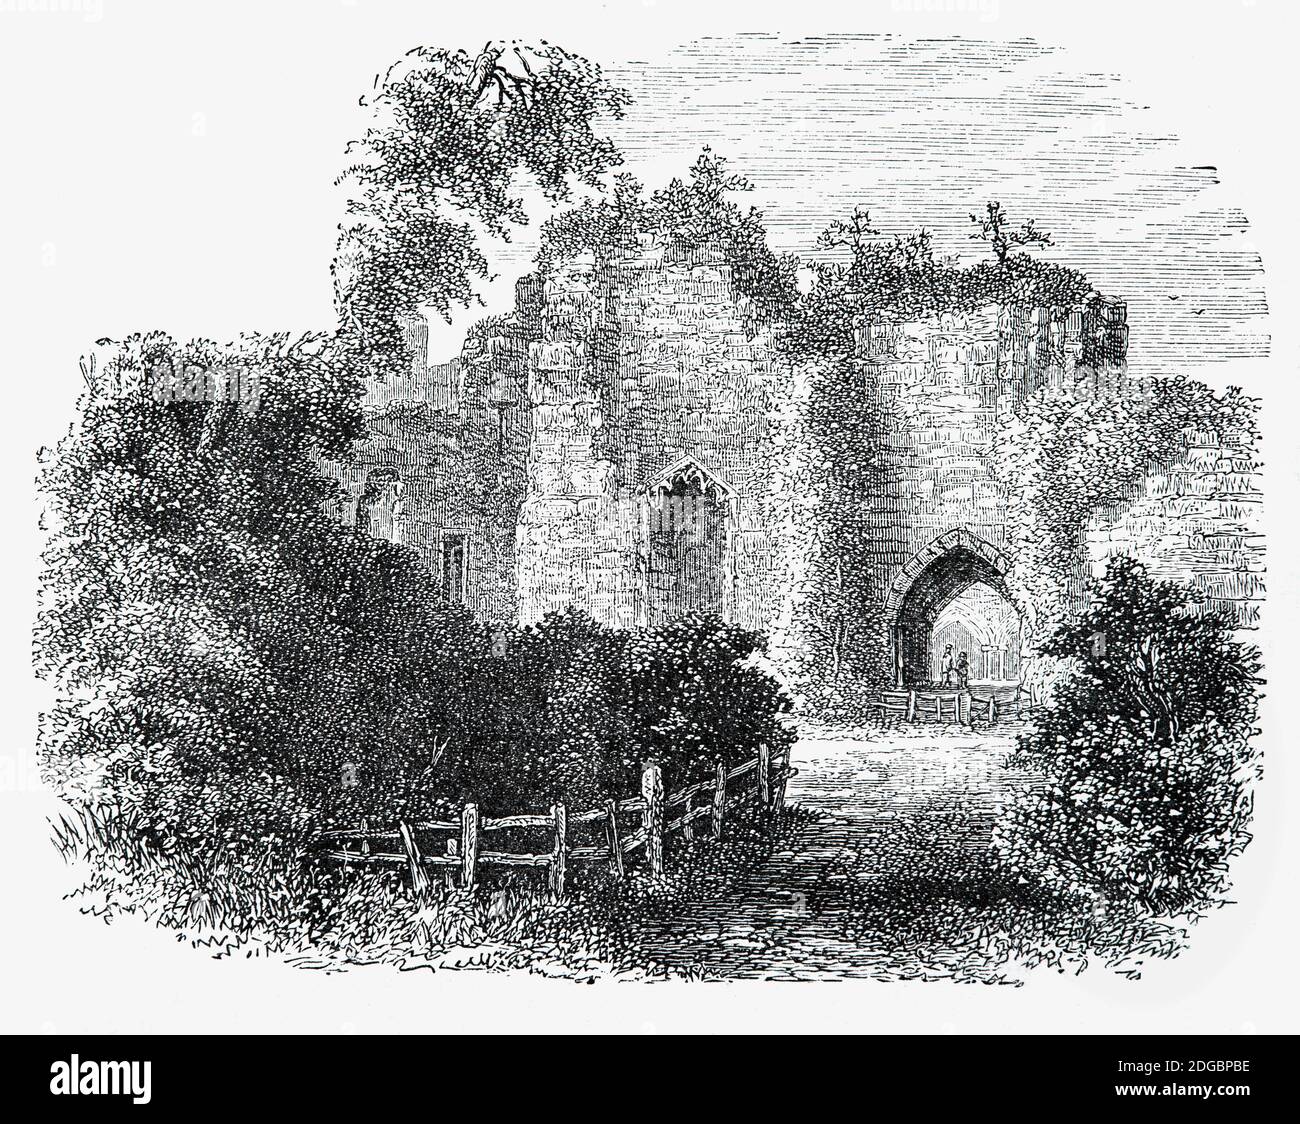 A 19th Century view of Goodrich Castle, Herefordshire, England. Built in the 12th century with a stone keep, it was expanded during the late 13th century to combine luxurious living quarters with extensive defences. Held first by Parliamentary and then Royalist forces in the English Civil War of the 1640s, it was finally besieged by Colonel John Birch in 1646 with the help of the huge 'Roaring Meg' mortar, resulting in the subsequent demolition of the castle. In the 18th century, the castle became the subject of paintings and poems, providing inspiration for Wordsworth's 'We are Seven'. Stock Photo